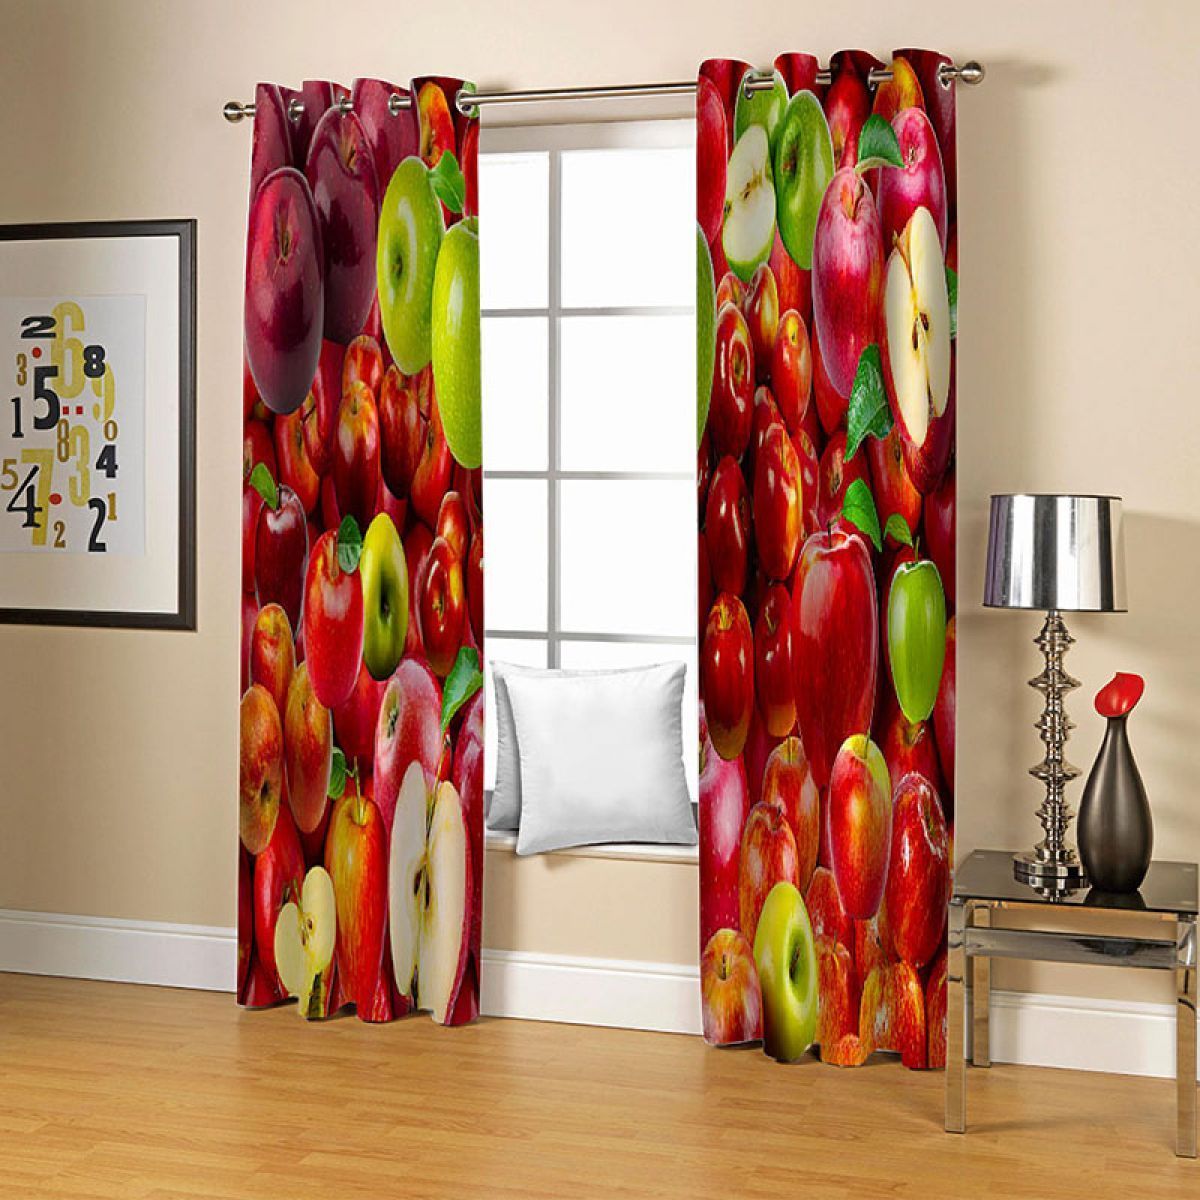 red and green apple fruits printed window curtain home decor 6050